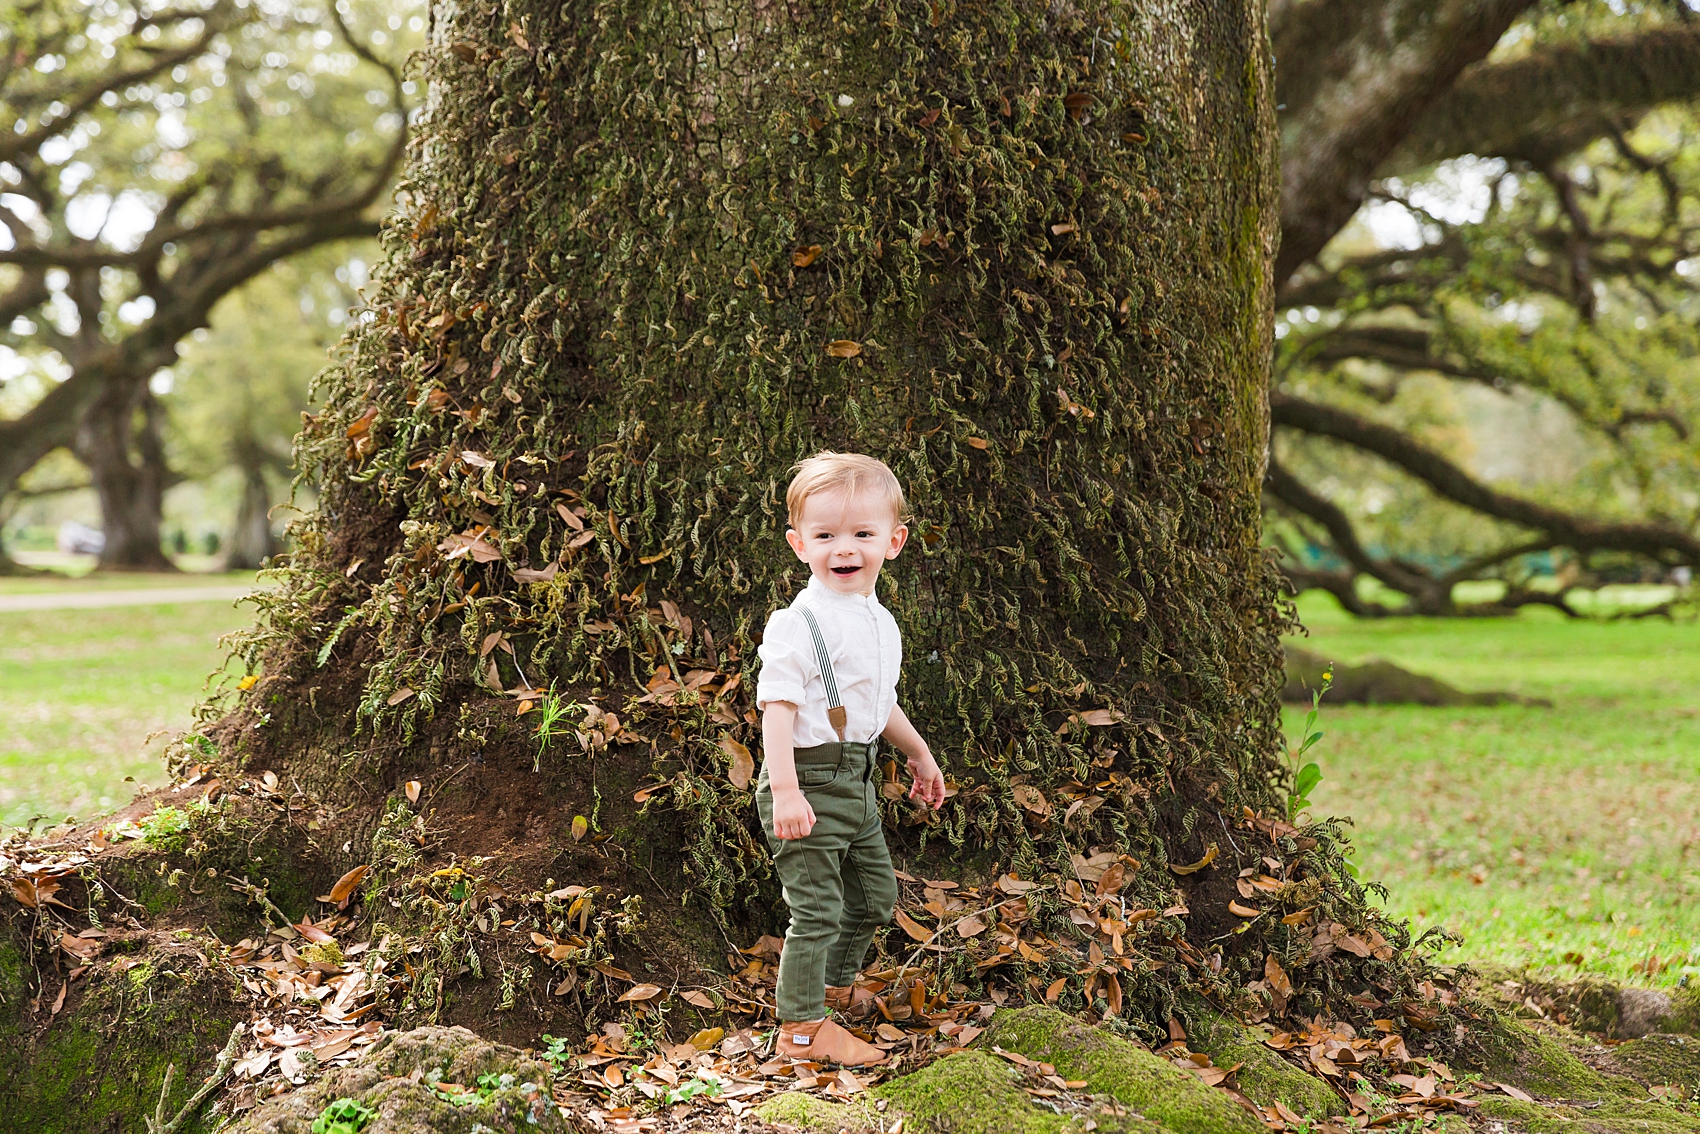 Leah Hope Photography | Scottsdale Phoenix Arizona Photographer | Traveling New Orleans Louisiana | Oak Alley Plantation | Tree Lined Plantation | Family Pictures | Family Photos | What to Wear | New Orleans Lafayette Cemetery | NOLA 